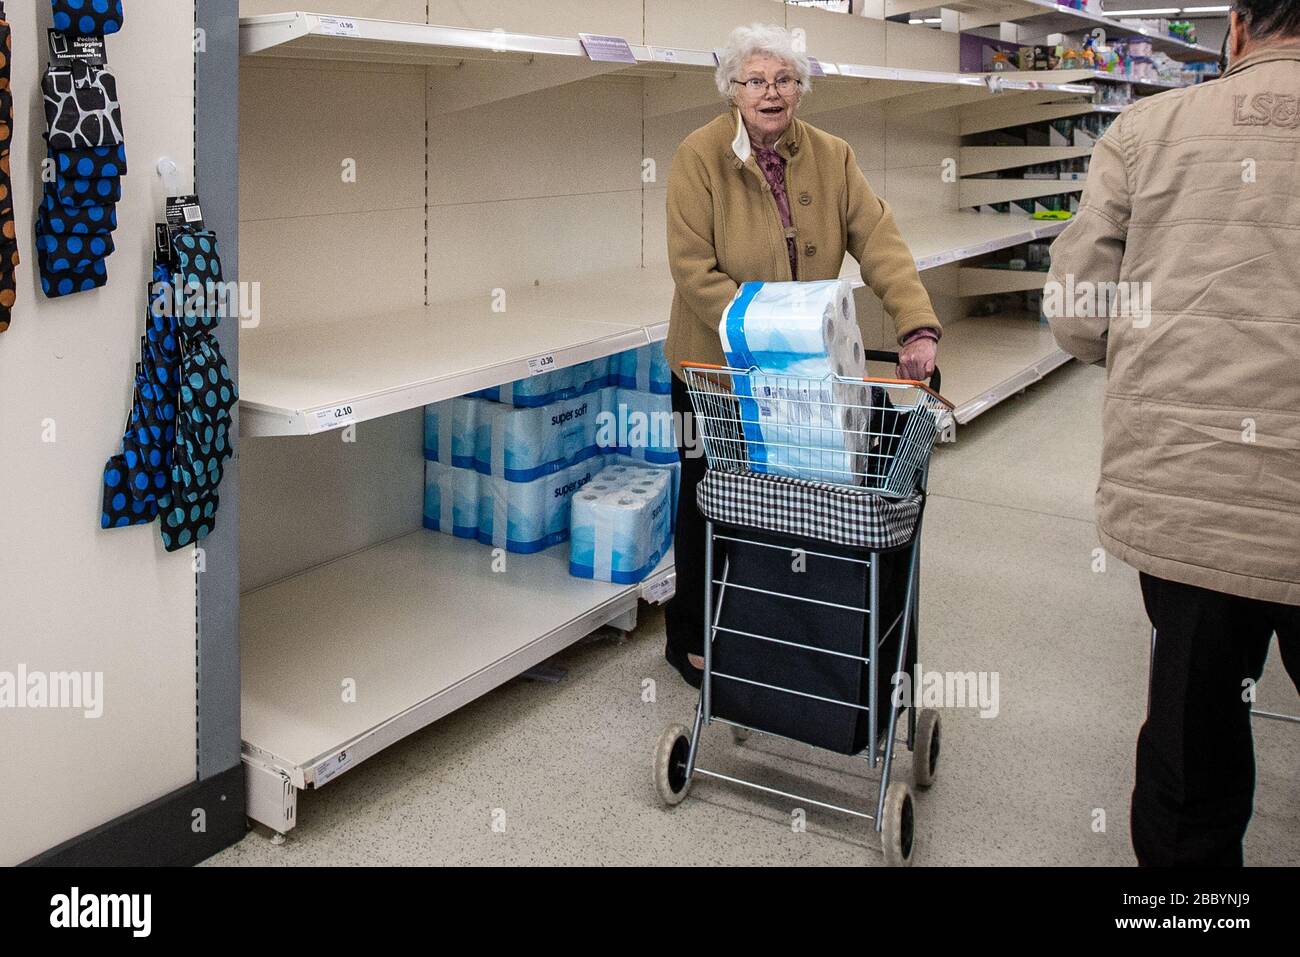 Elderly lady in supermarket with large pack of toilet roll in her shopping basket during Coronavirus panic buying in UK March 2020 Stock Photo